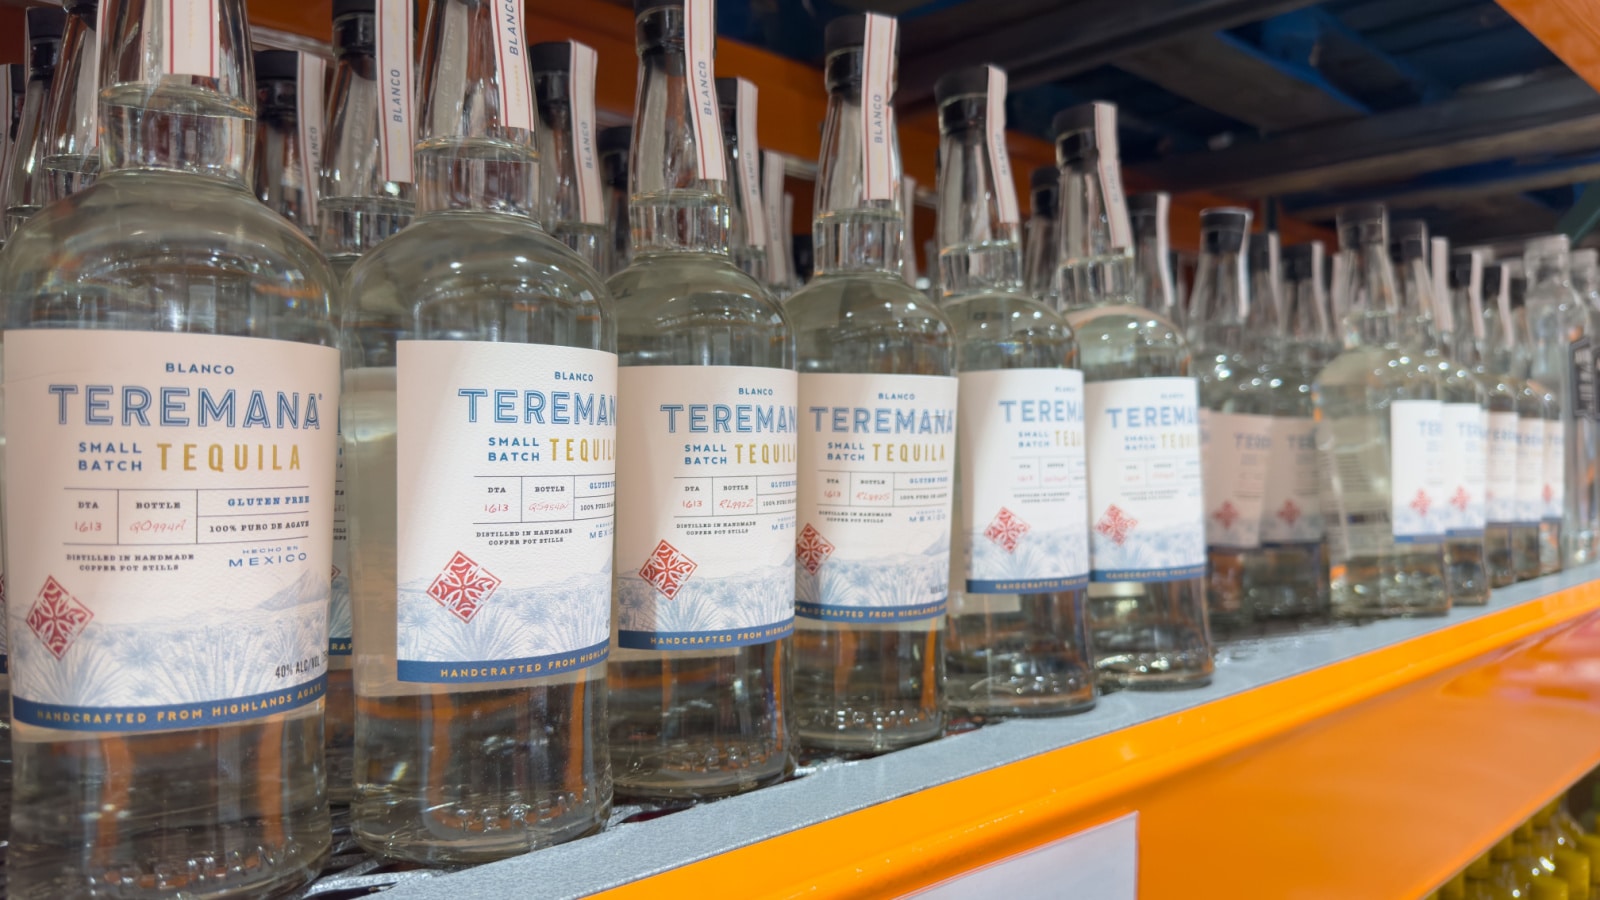 Los Angeles, California, United States - 02-01-2023: A view of several bottles of Teremana tequila blanco, on display at a local grocery store.